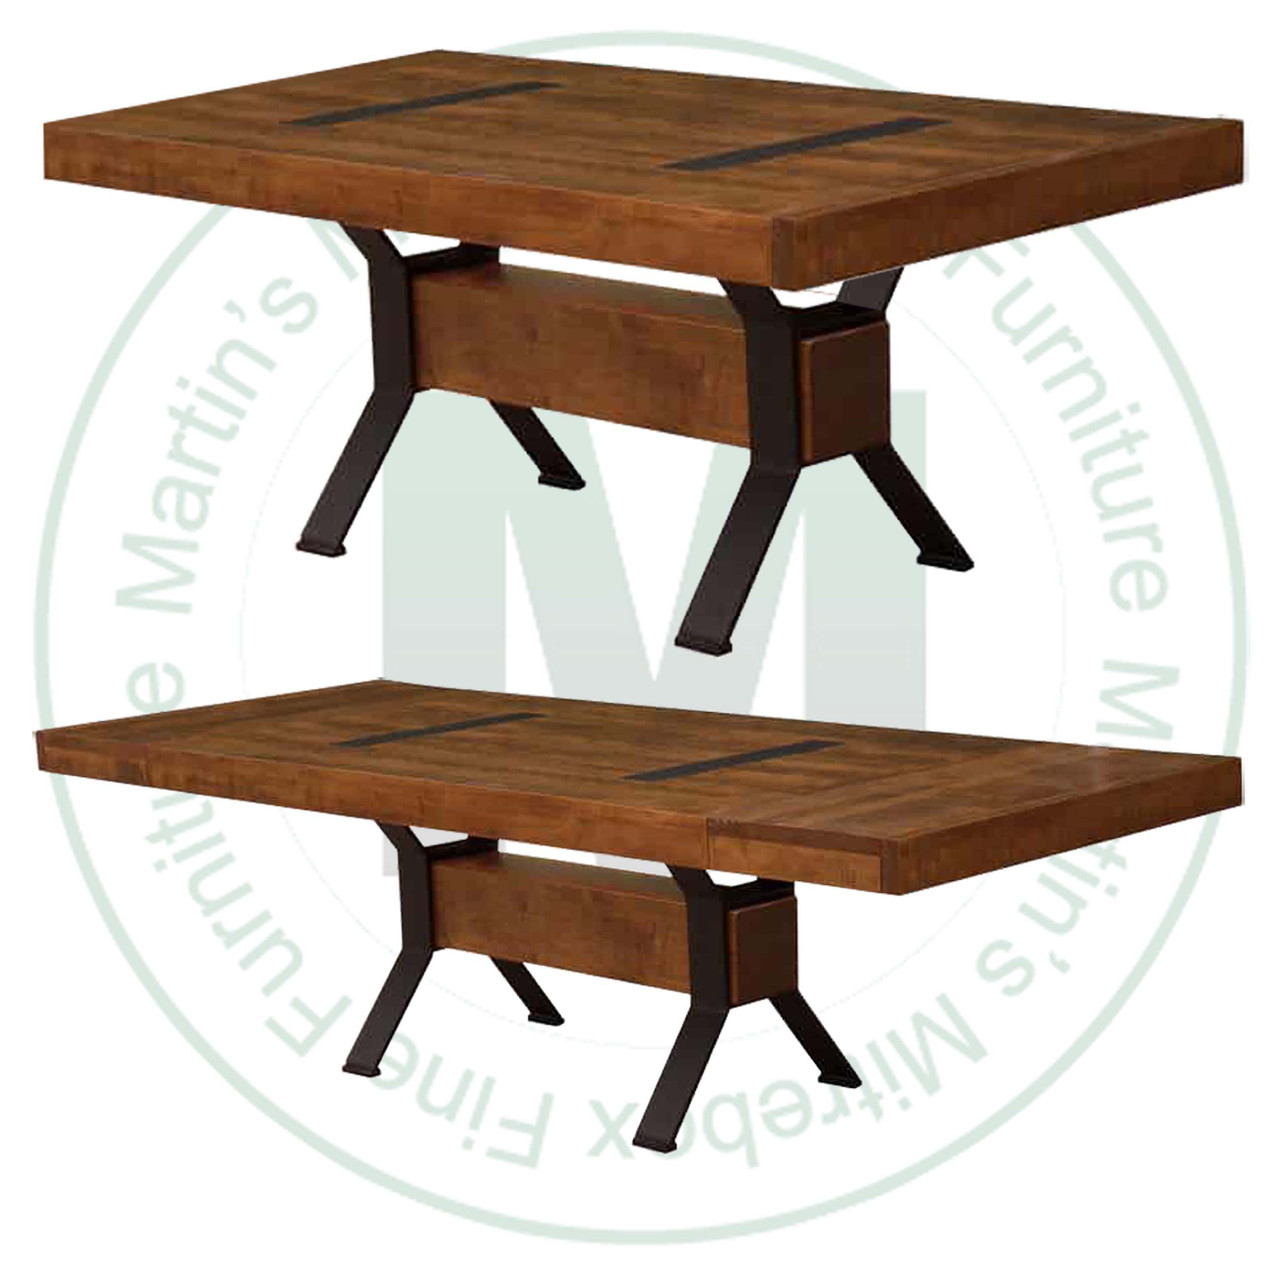 Pine Millwright Solid Top Pedestal Table With 2 - 16'' End Leaves 36'' Deep x 96'' Wide x 30'' High